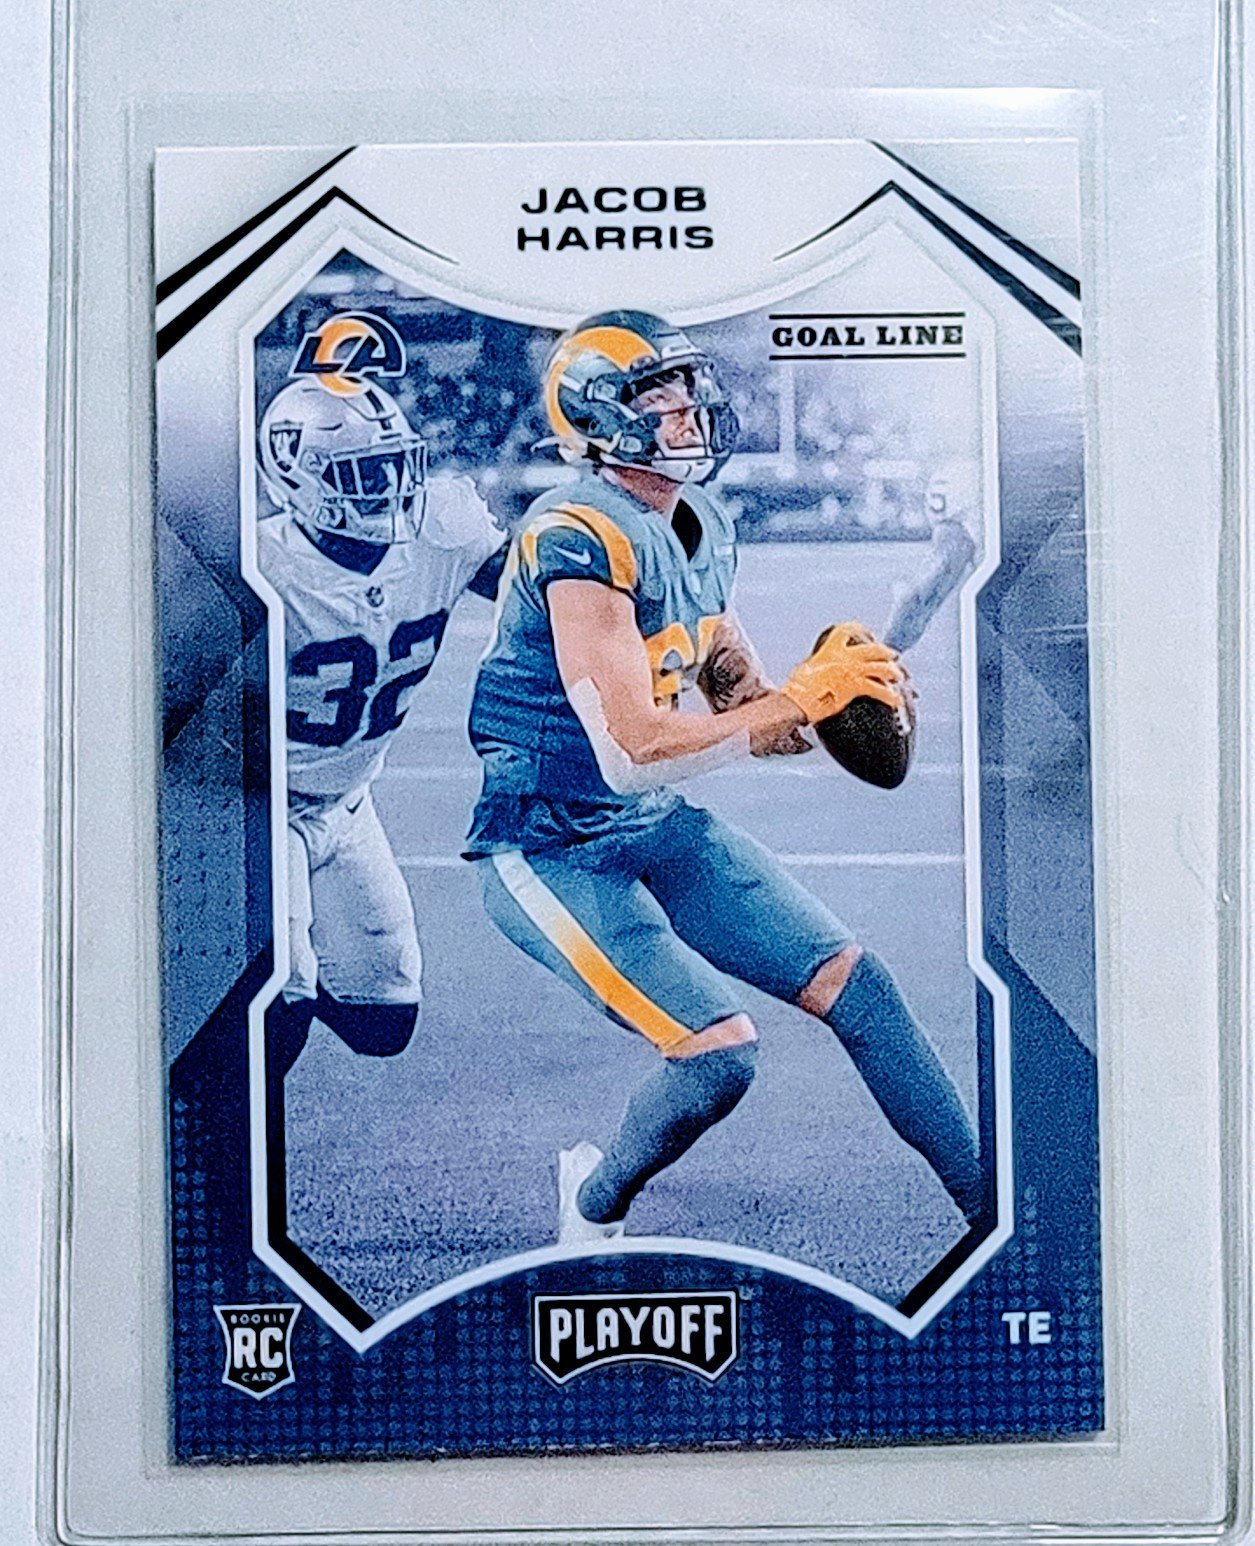 2021 Panini Playoffs Jacob Harris Goal Line Rookie Football Card AVM1 simple Xclusive Collectibles   